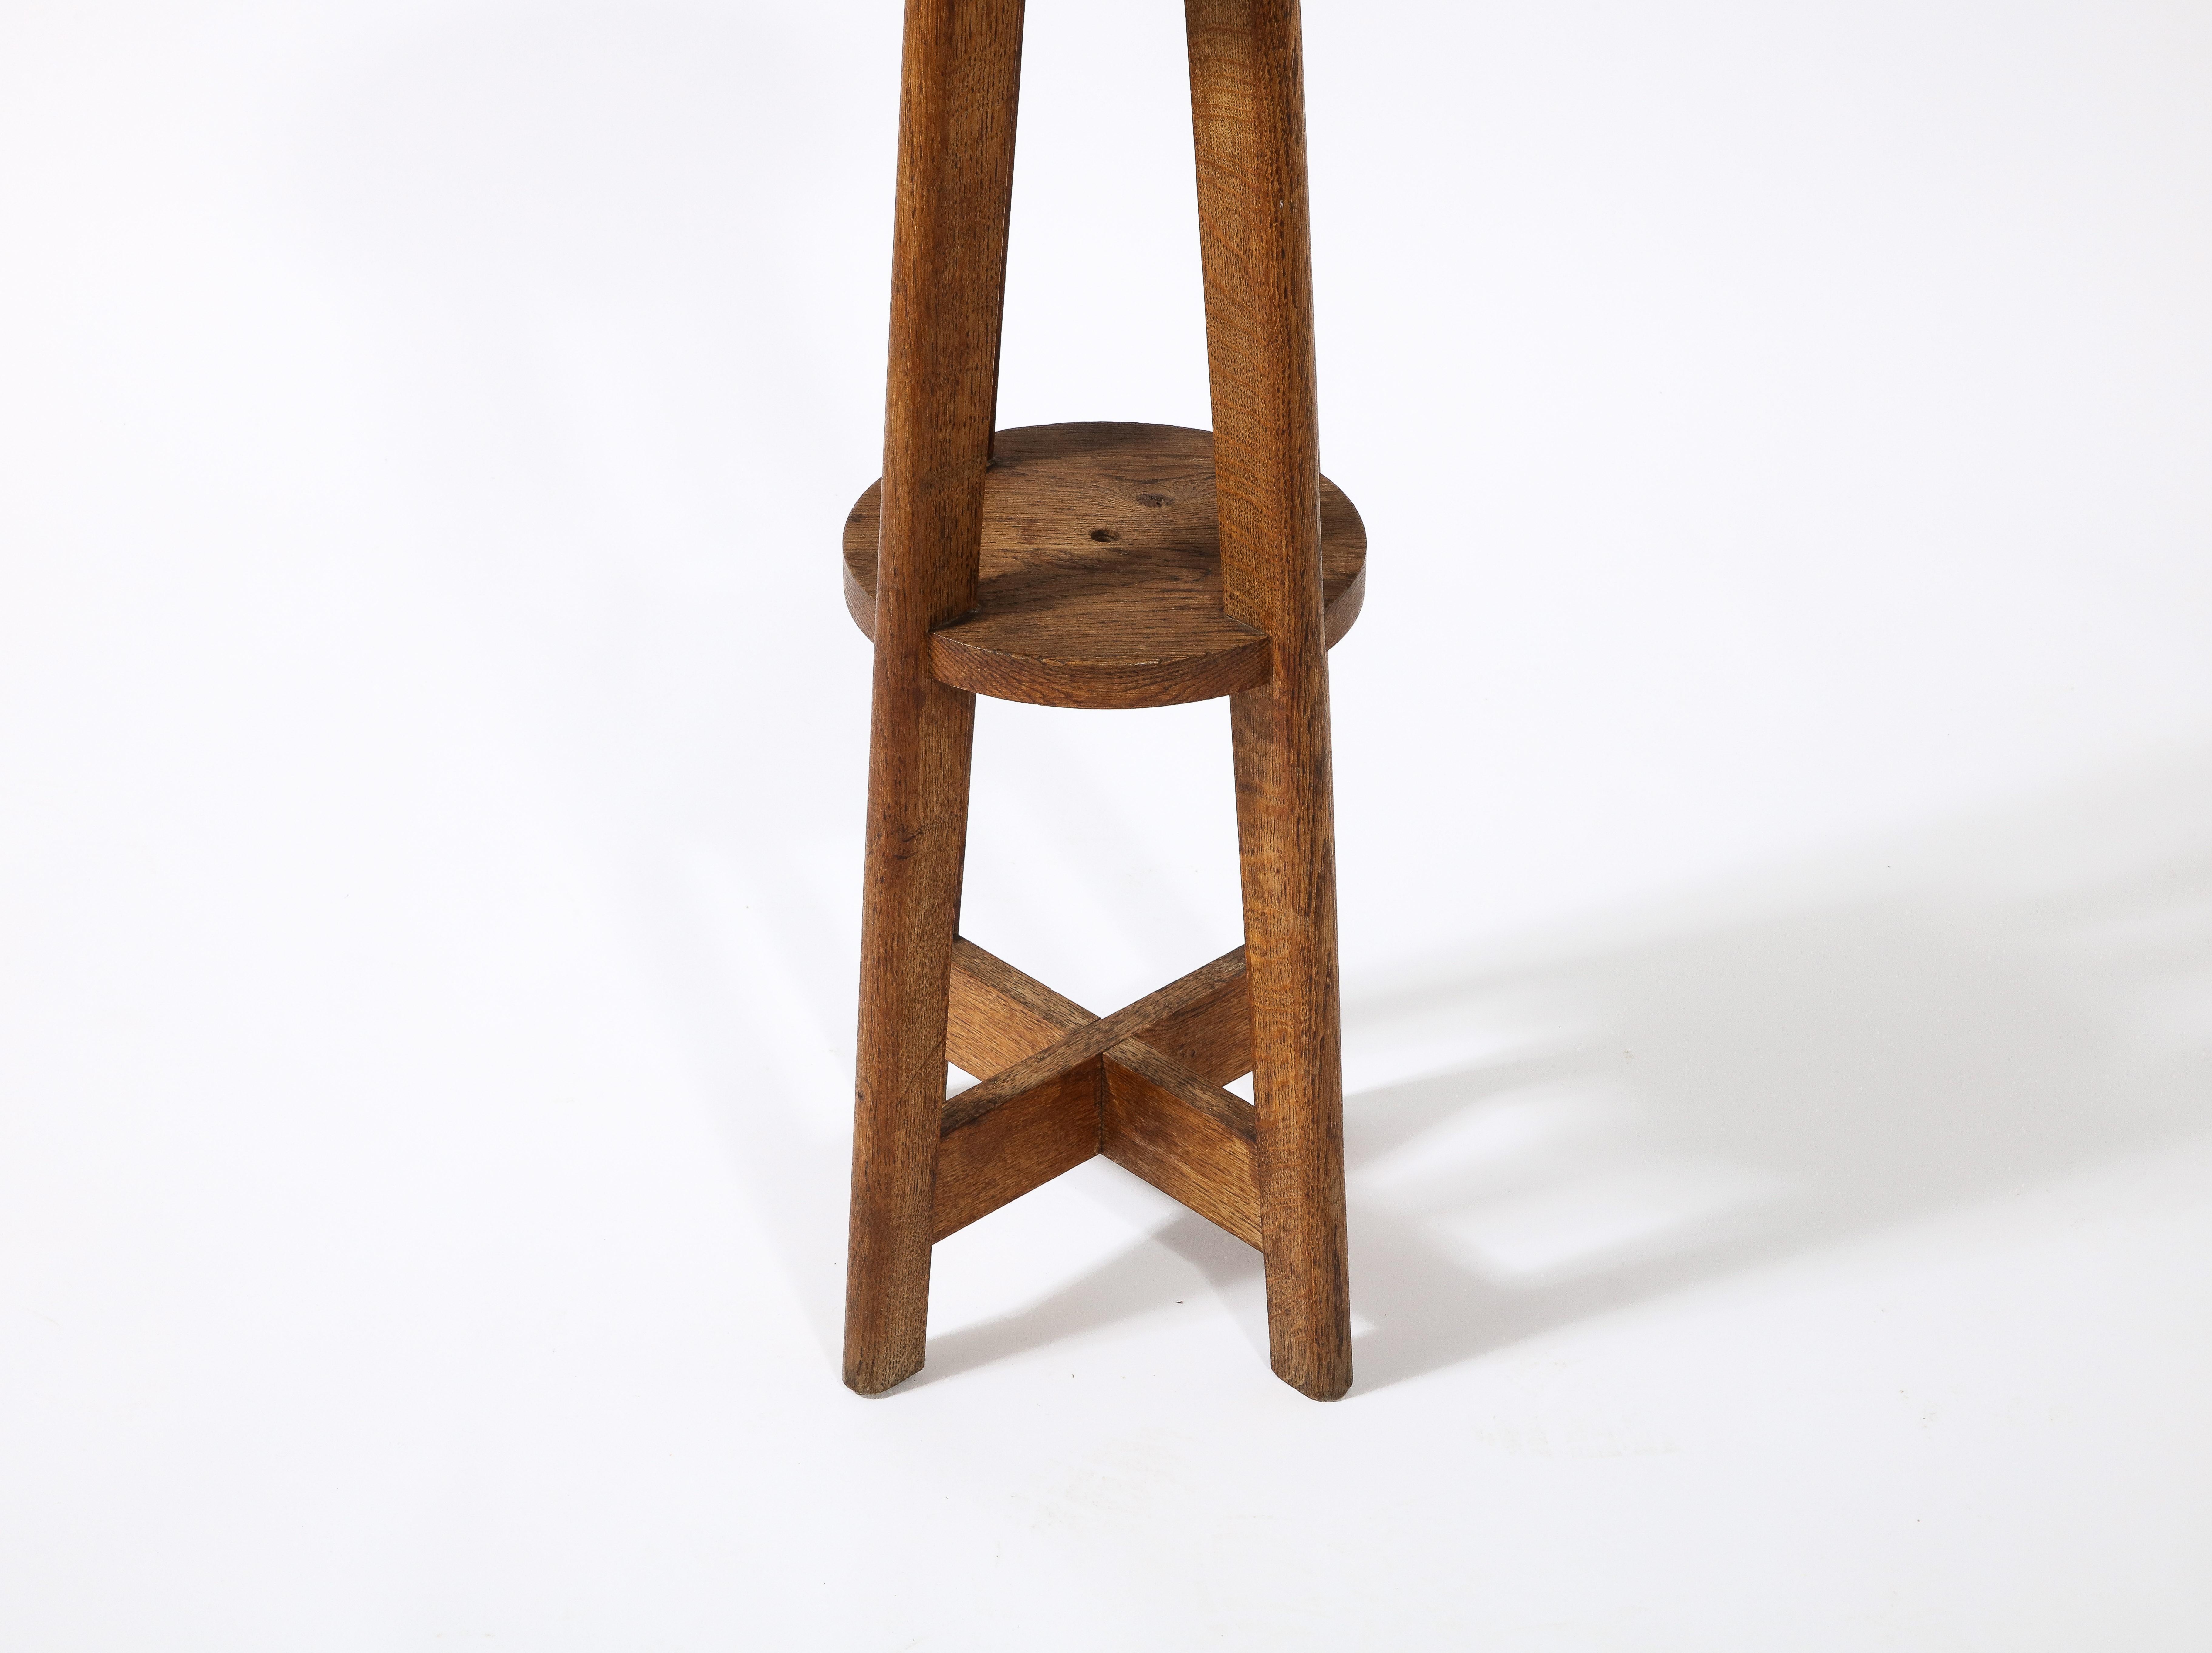 Tall Rustic Farm Stool or Pedestal in Solid Oak, France 1950's For Sale 4